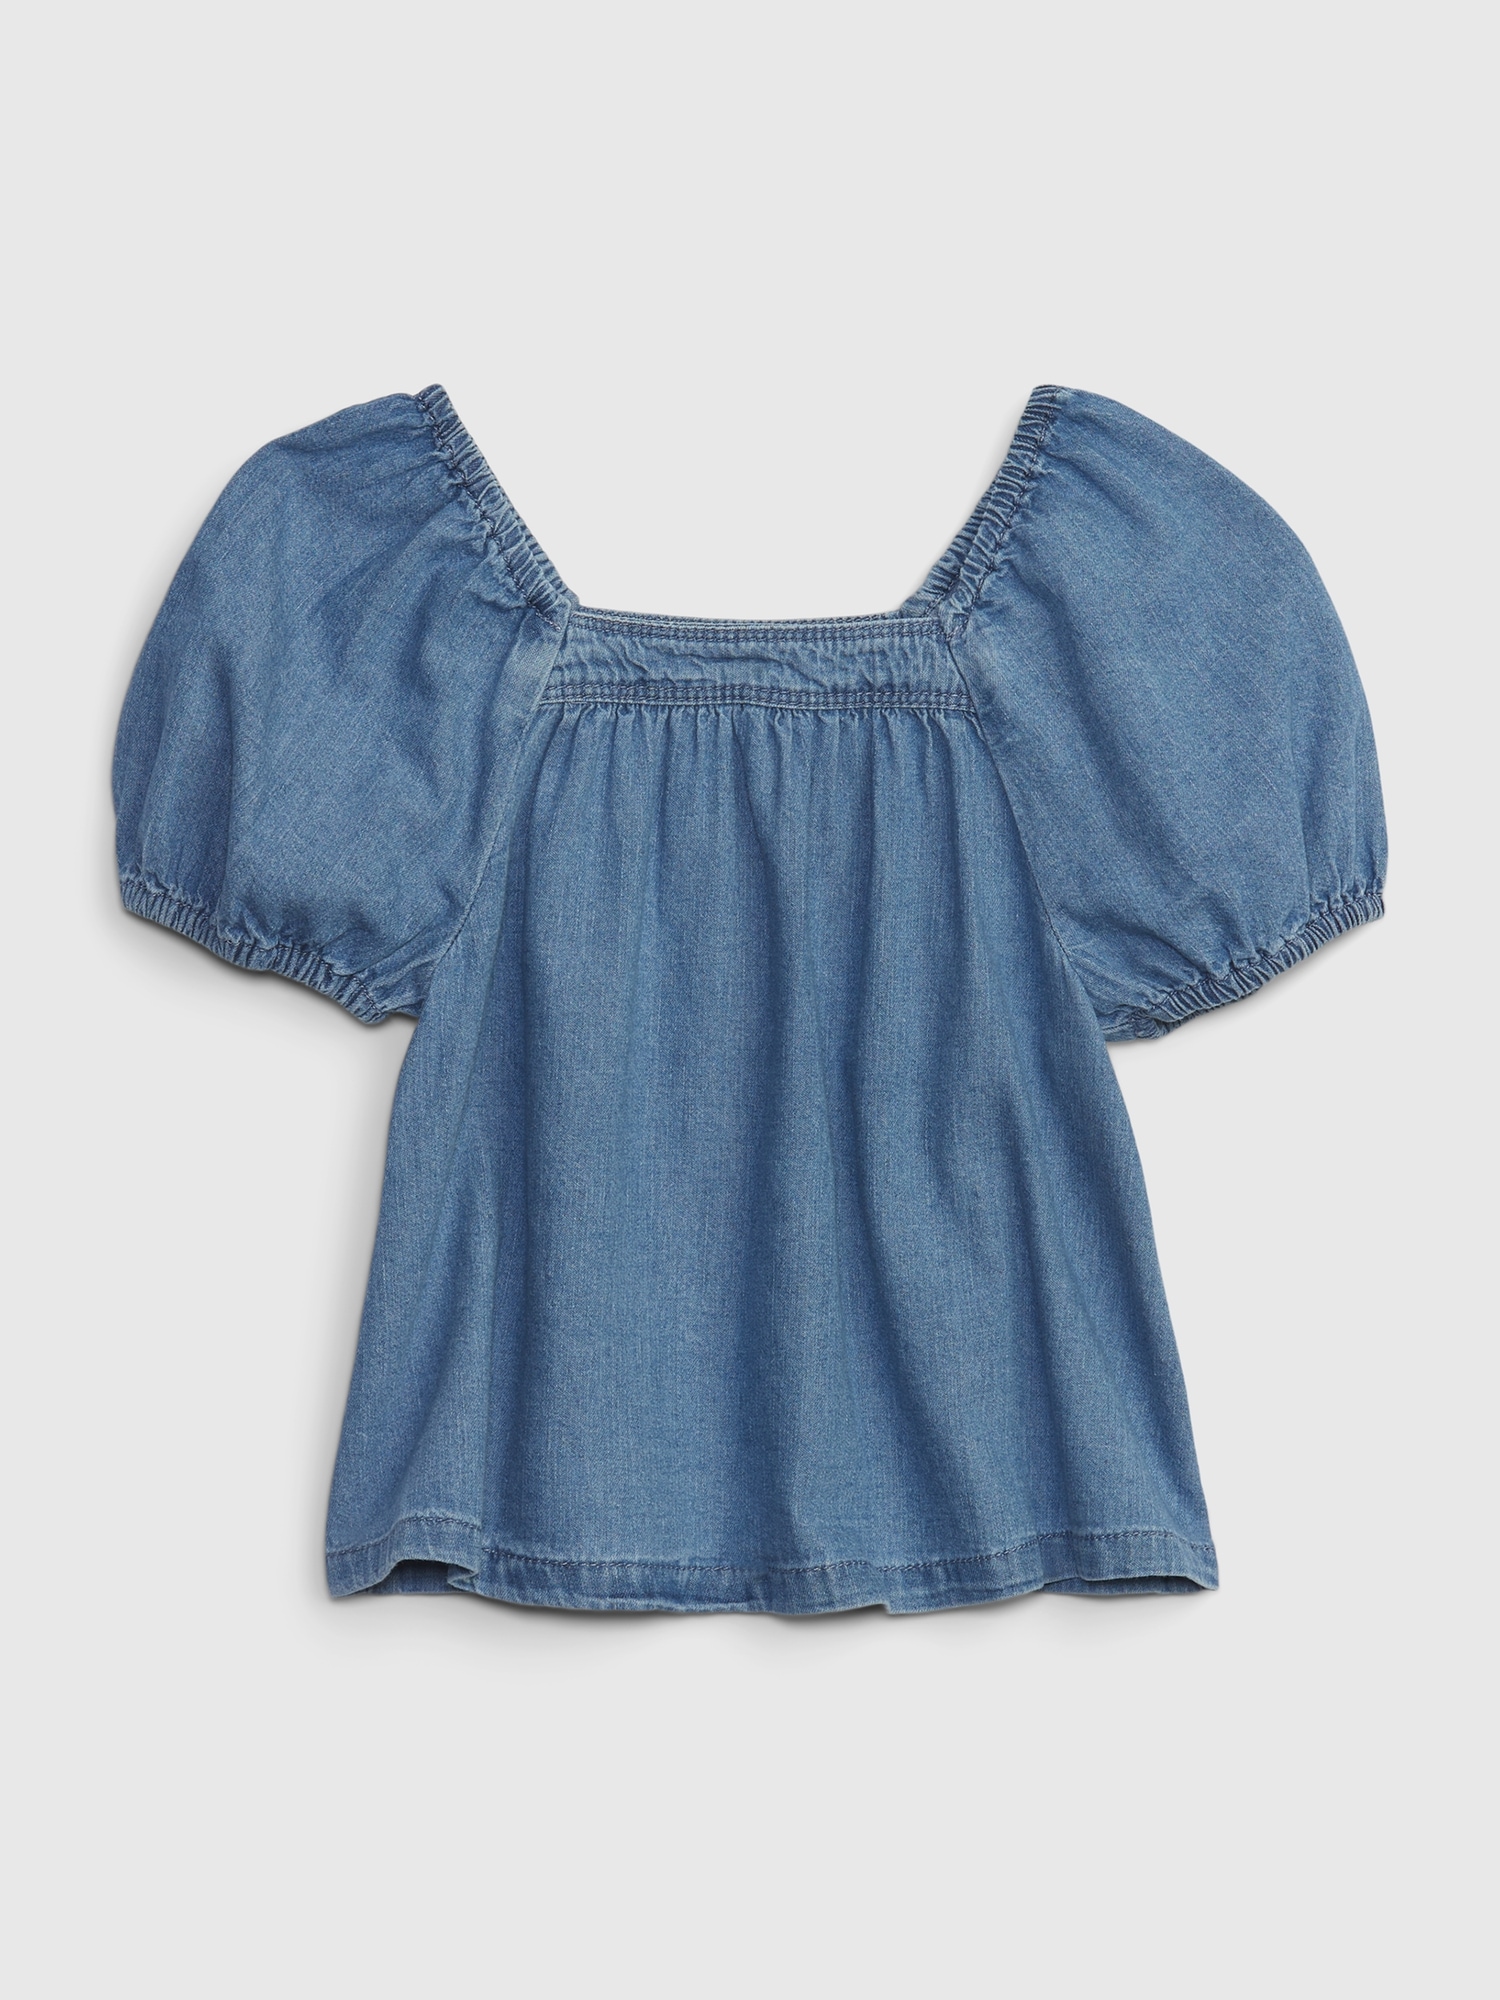 Gap Toddler Puff Sleeve Denim Top with Washwell blue. 1